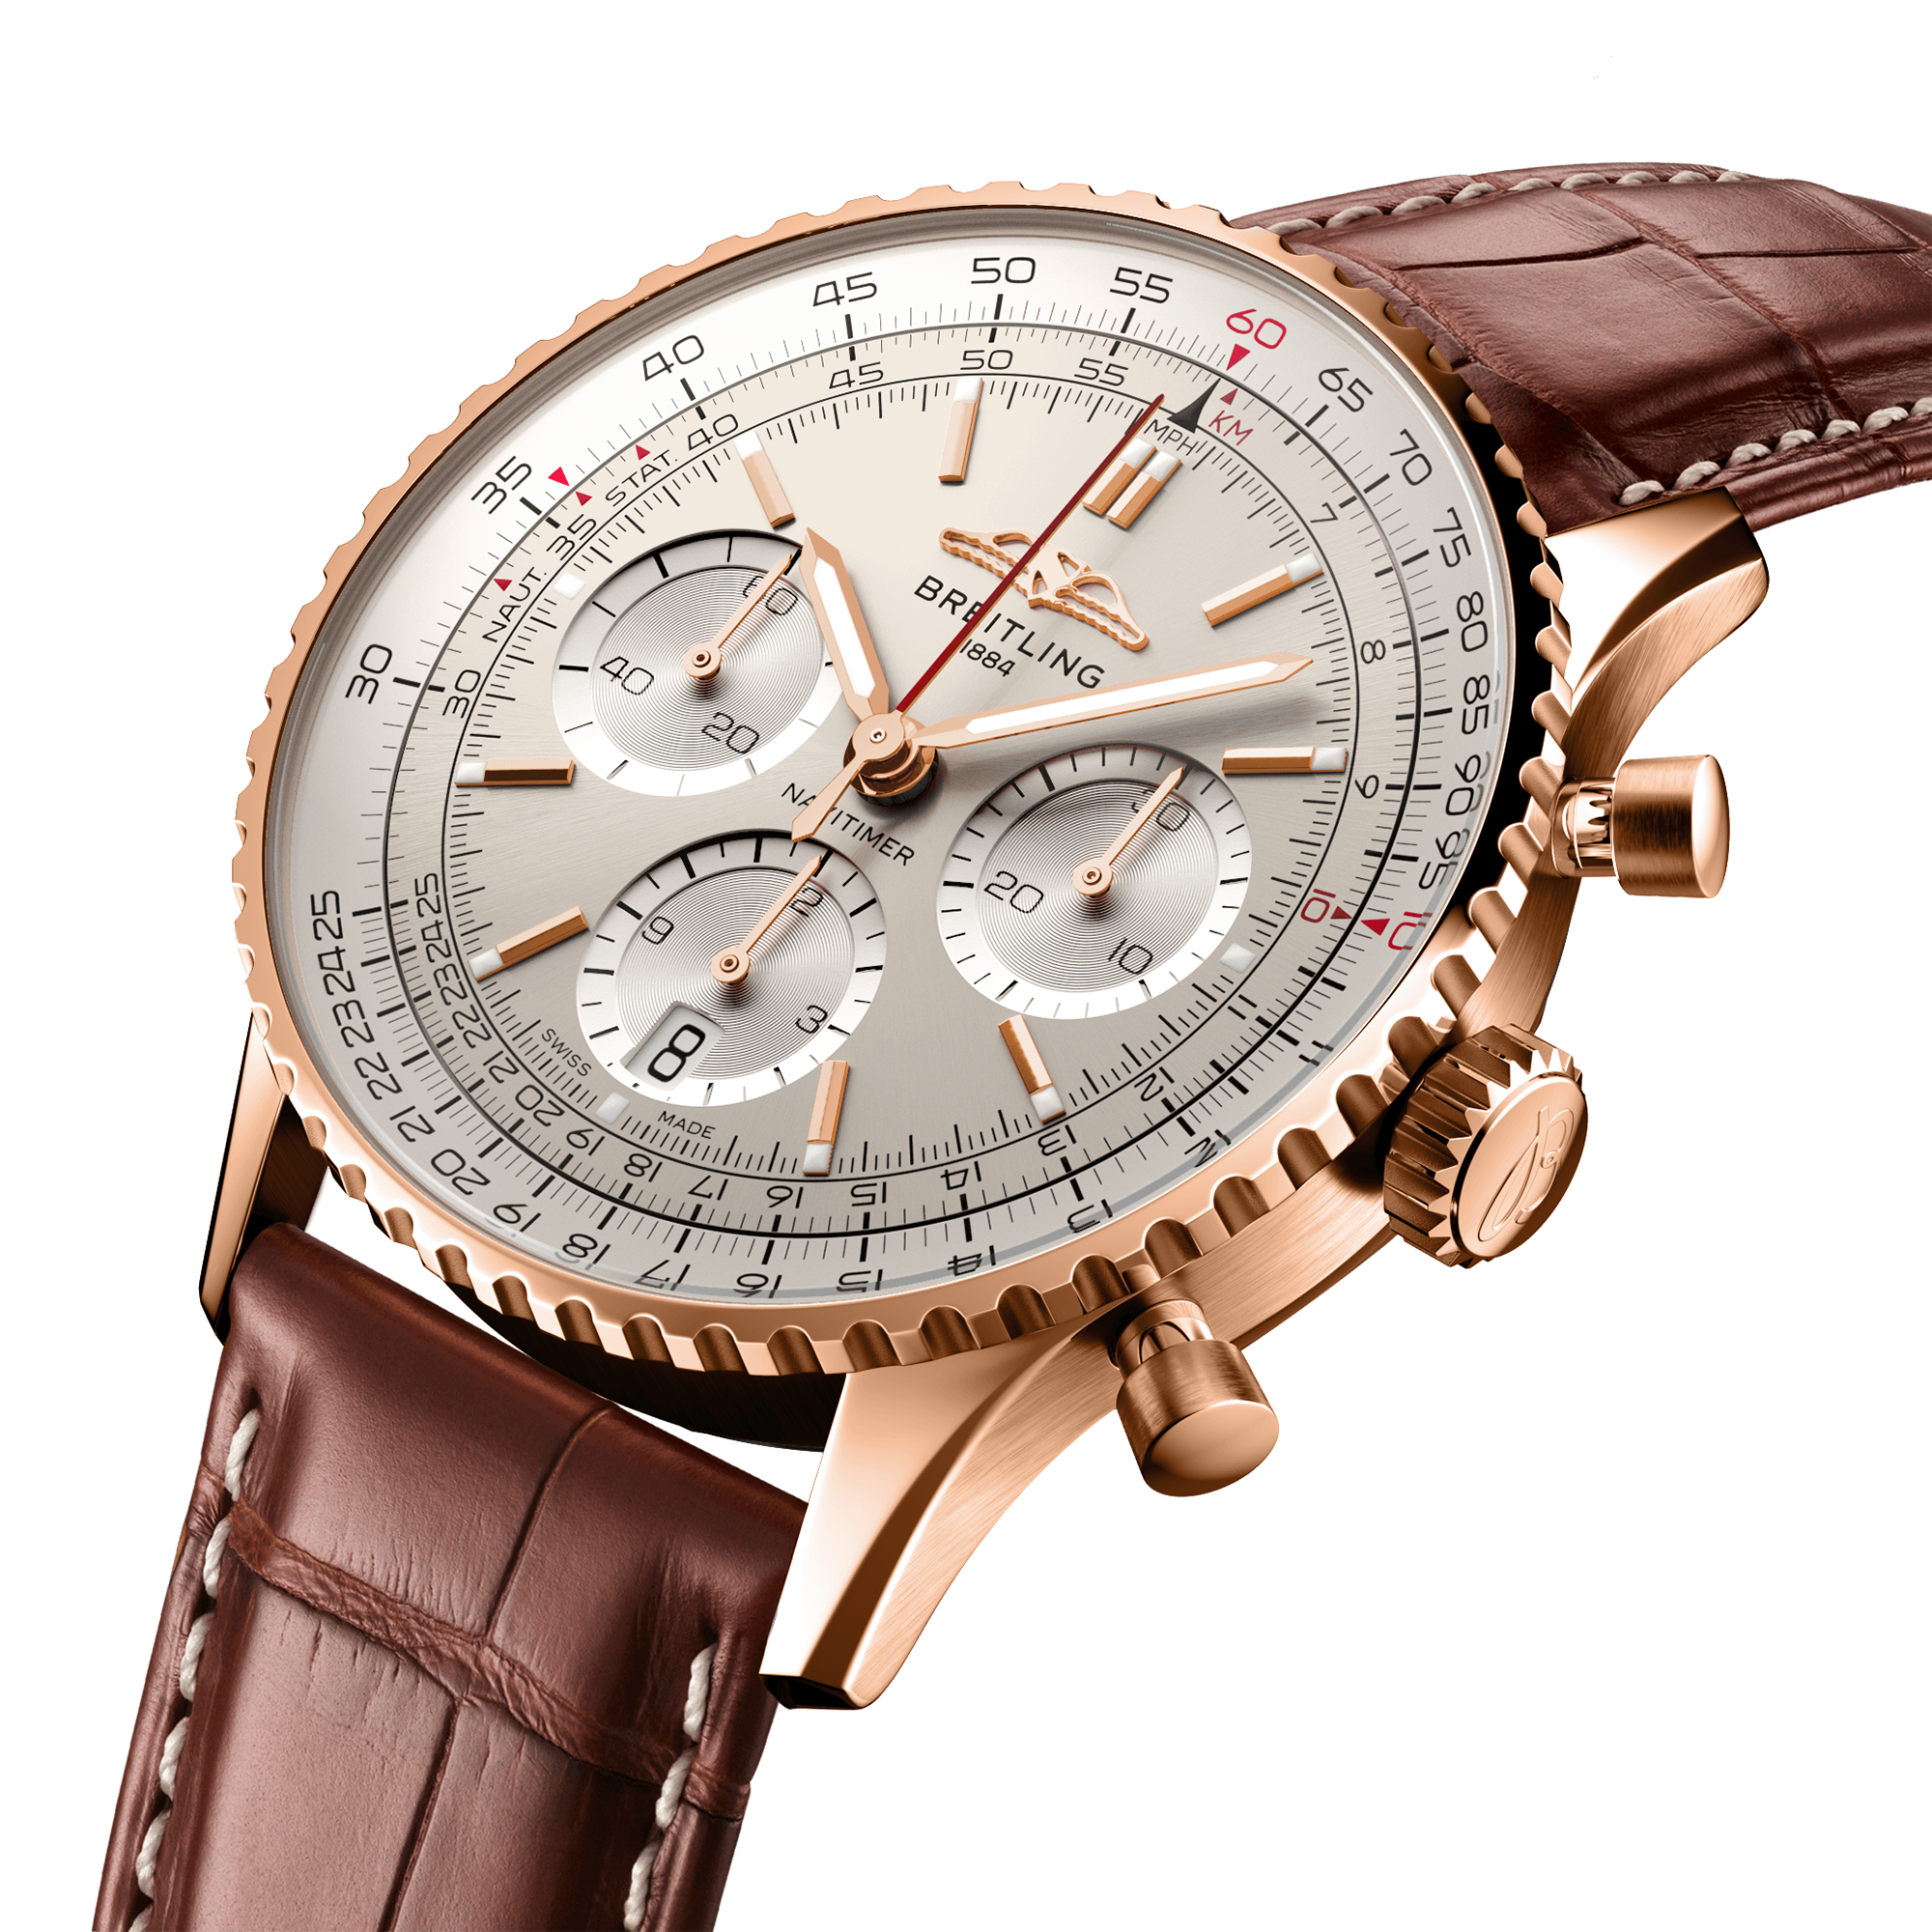 Navitimer 18ct Red Gold 41mm Silver Dial Men's Chronograph Watch